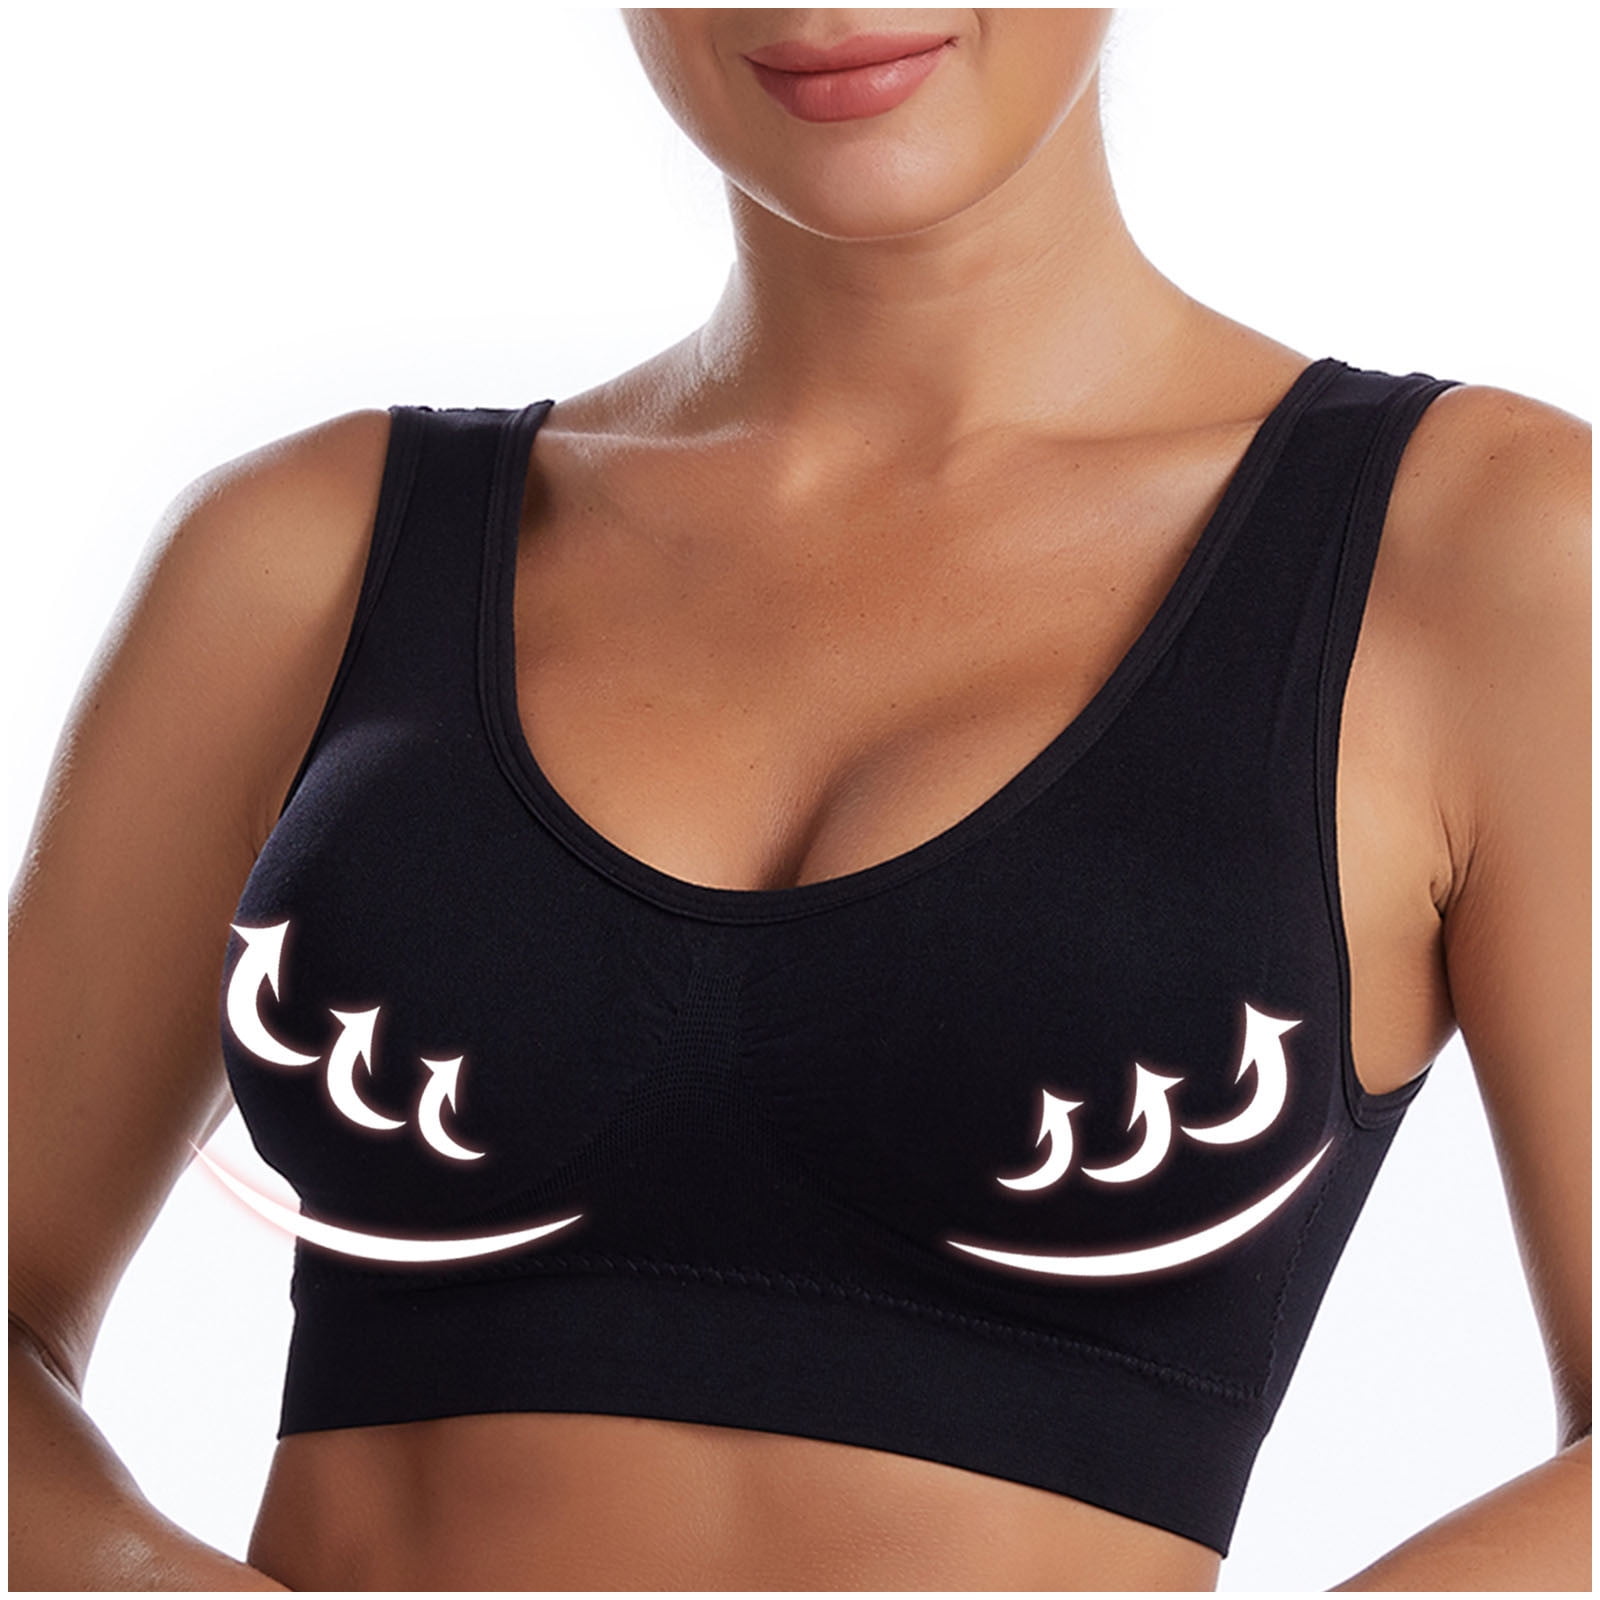 High Impact Sports Bra High Support Unlined Underwire Womens Size